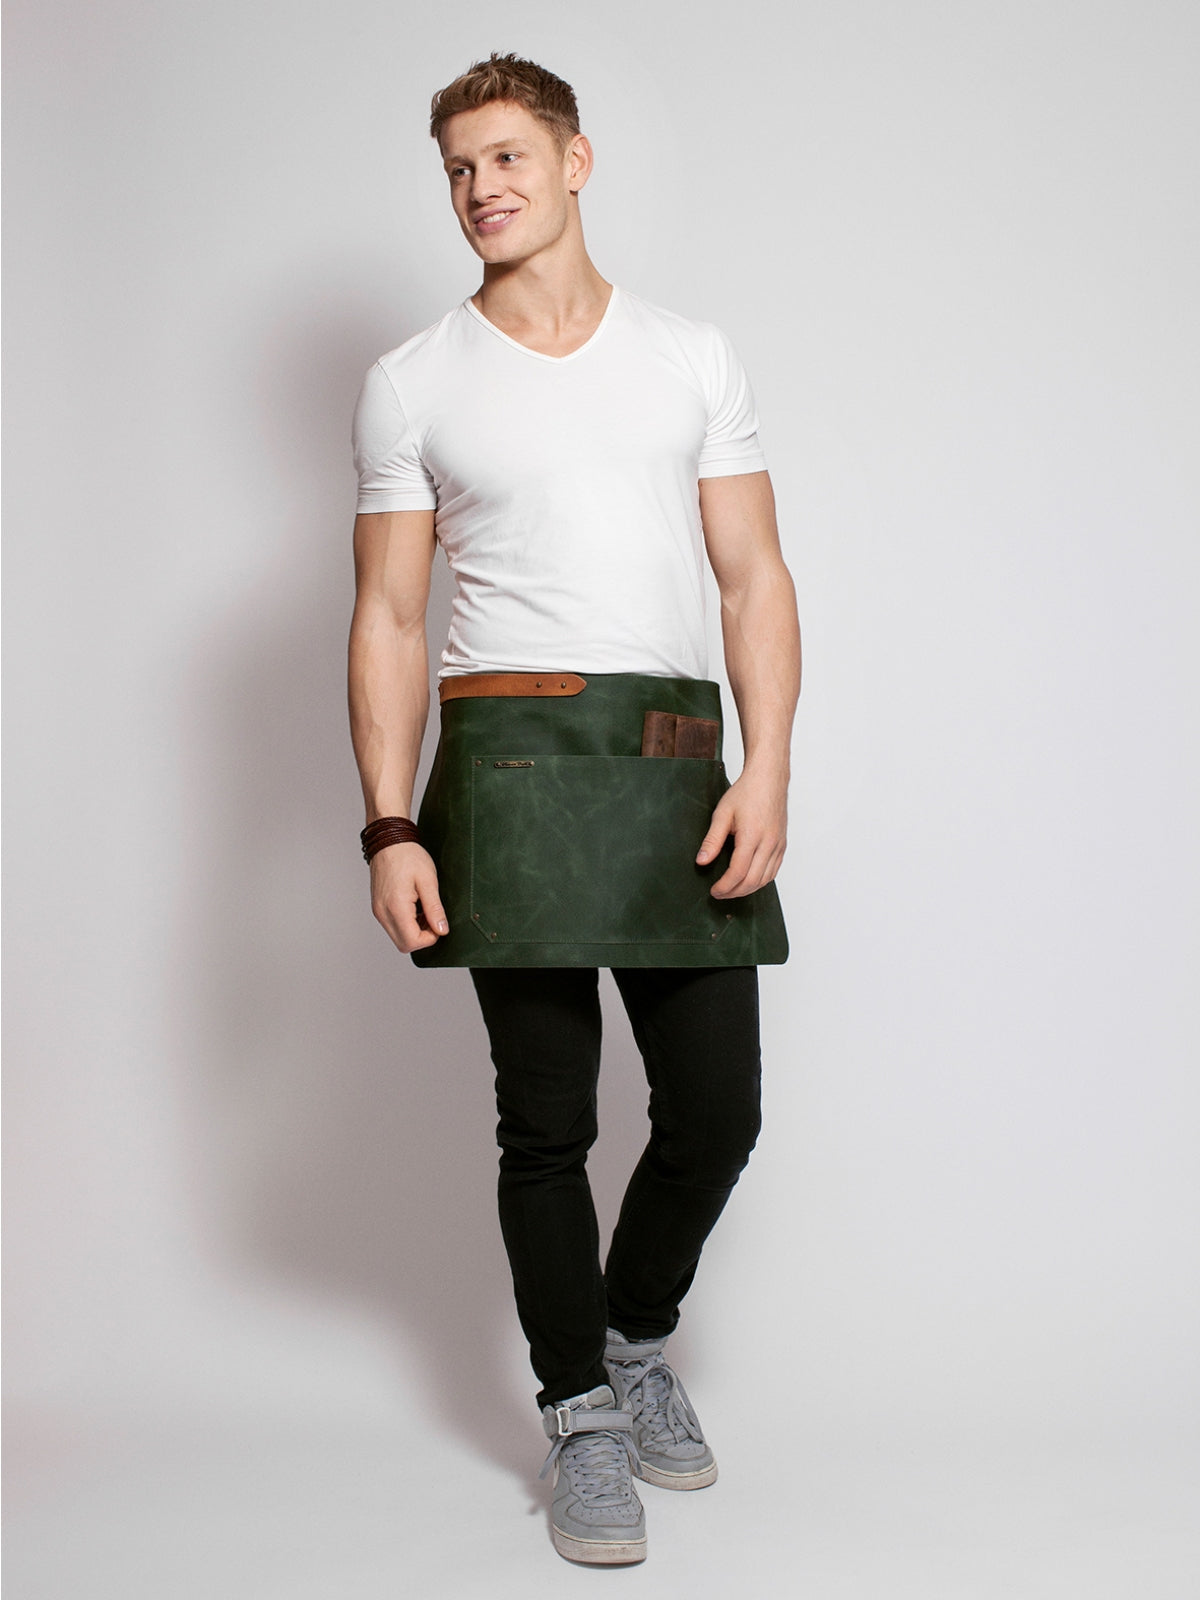 Leather Waist Apron Rustic Green by Stalwart -  ChefsCotton